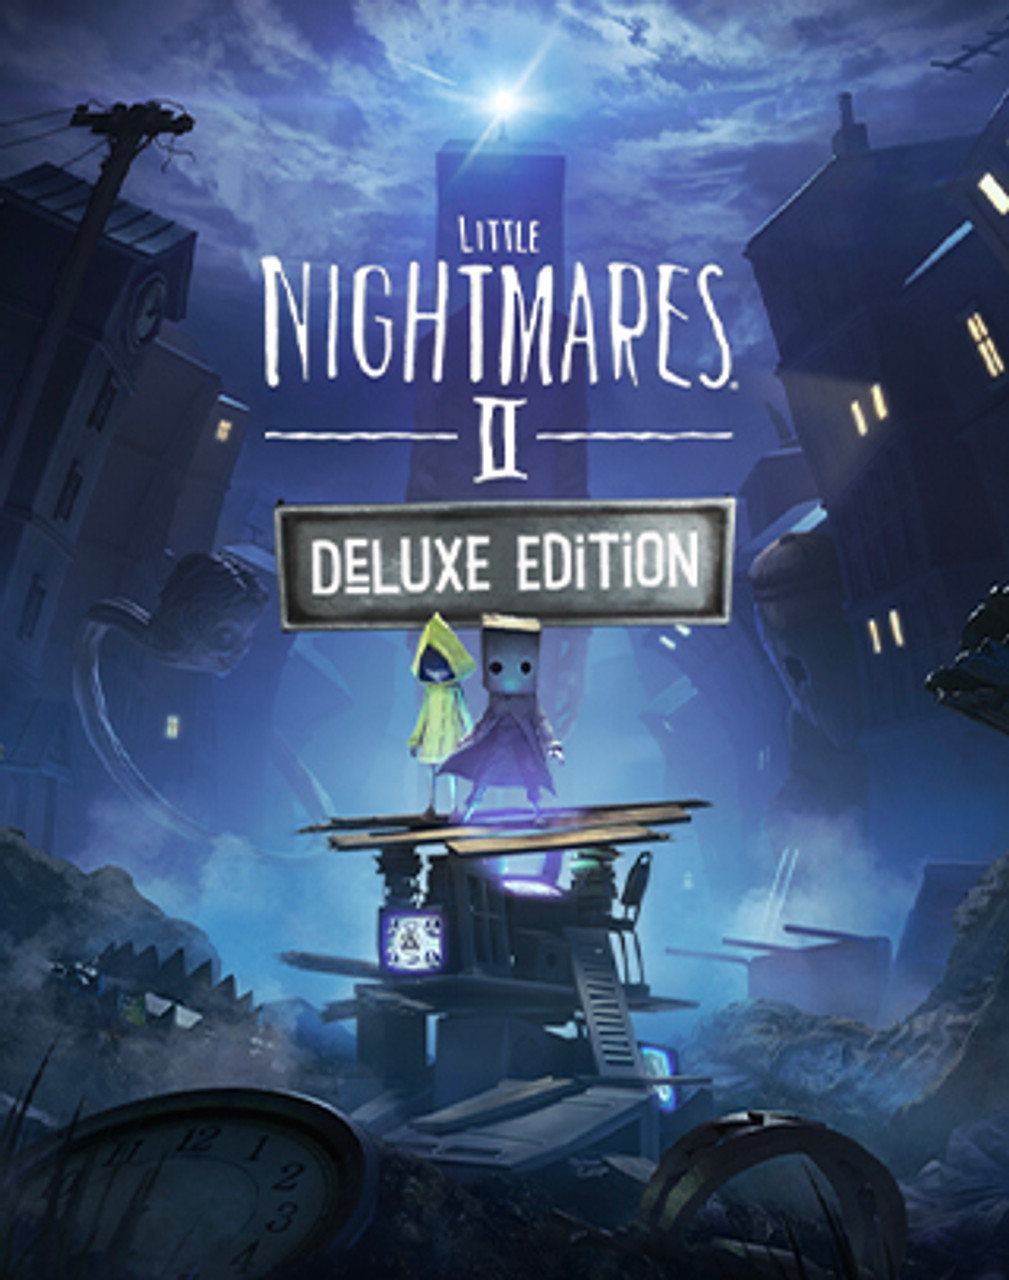 LITTLE NIGHTMARES - Deluxe Edition Bandai Namco | [PC Store Download